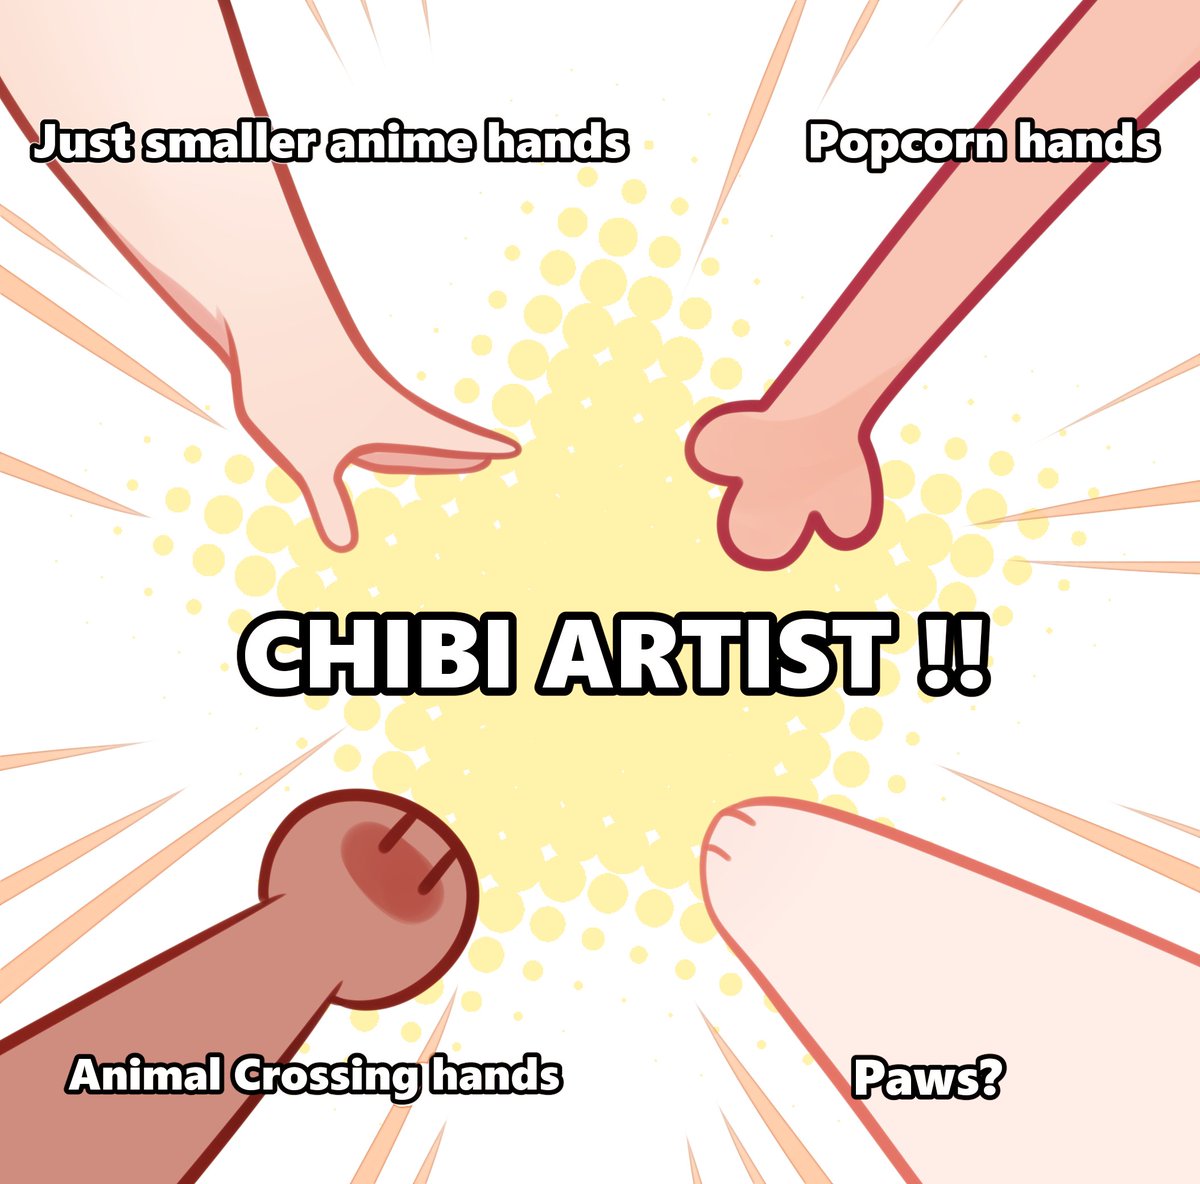 Artists... If you draw chibis, which one are you?